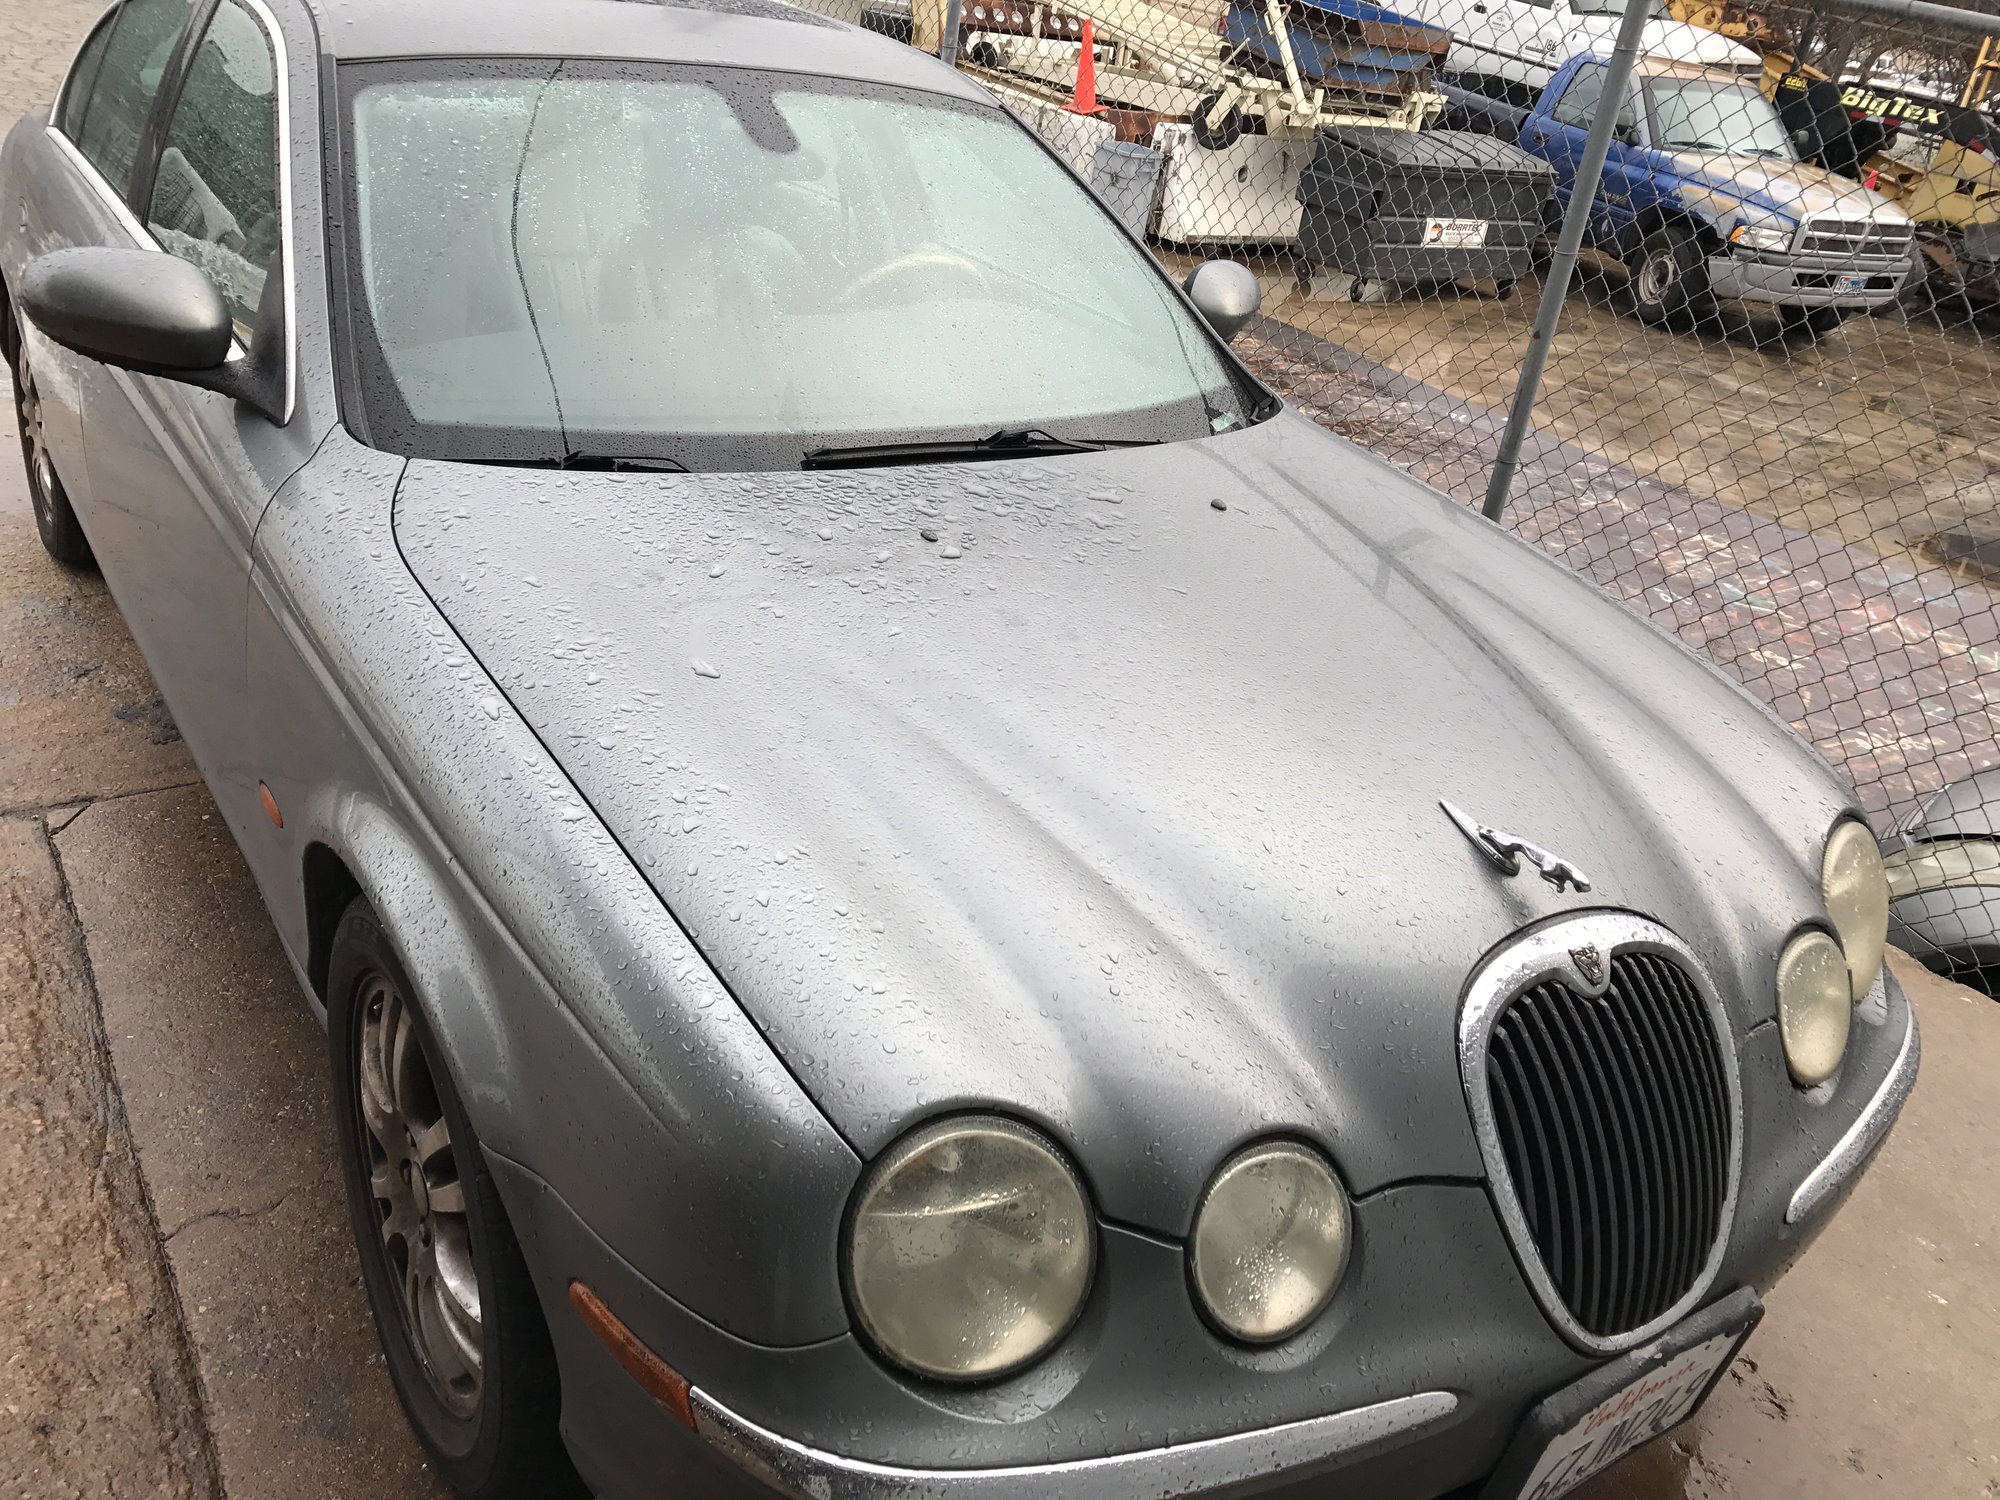 2003 Jaguar S-Type - 2003 Jaguar S-Type 4.2L V8 SALVAGE TITLE Not Currently Running / For Parts or Repair - Used - VIN SAJEA01U13HM86524 - 254,000 Miles - 8 cyl - 2WD - Automatic - Sedan - Gray - Montclair, CA 91763, United States